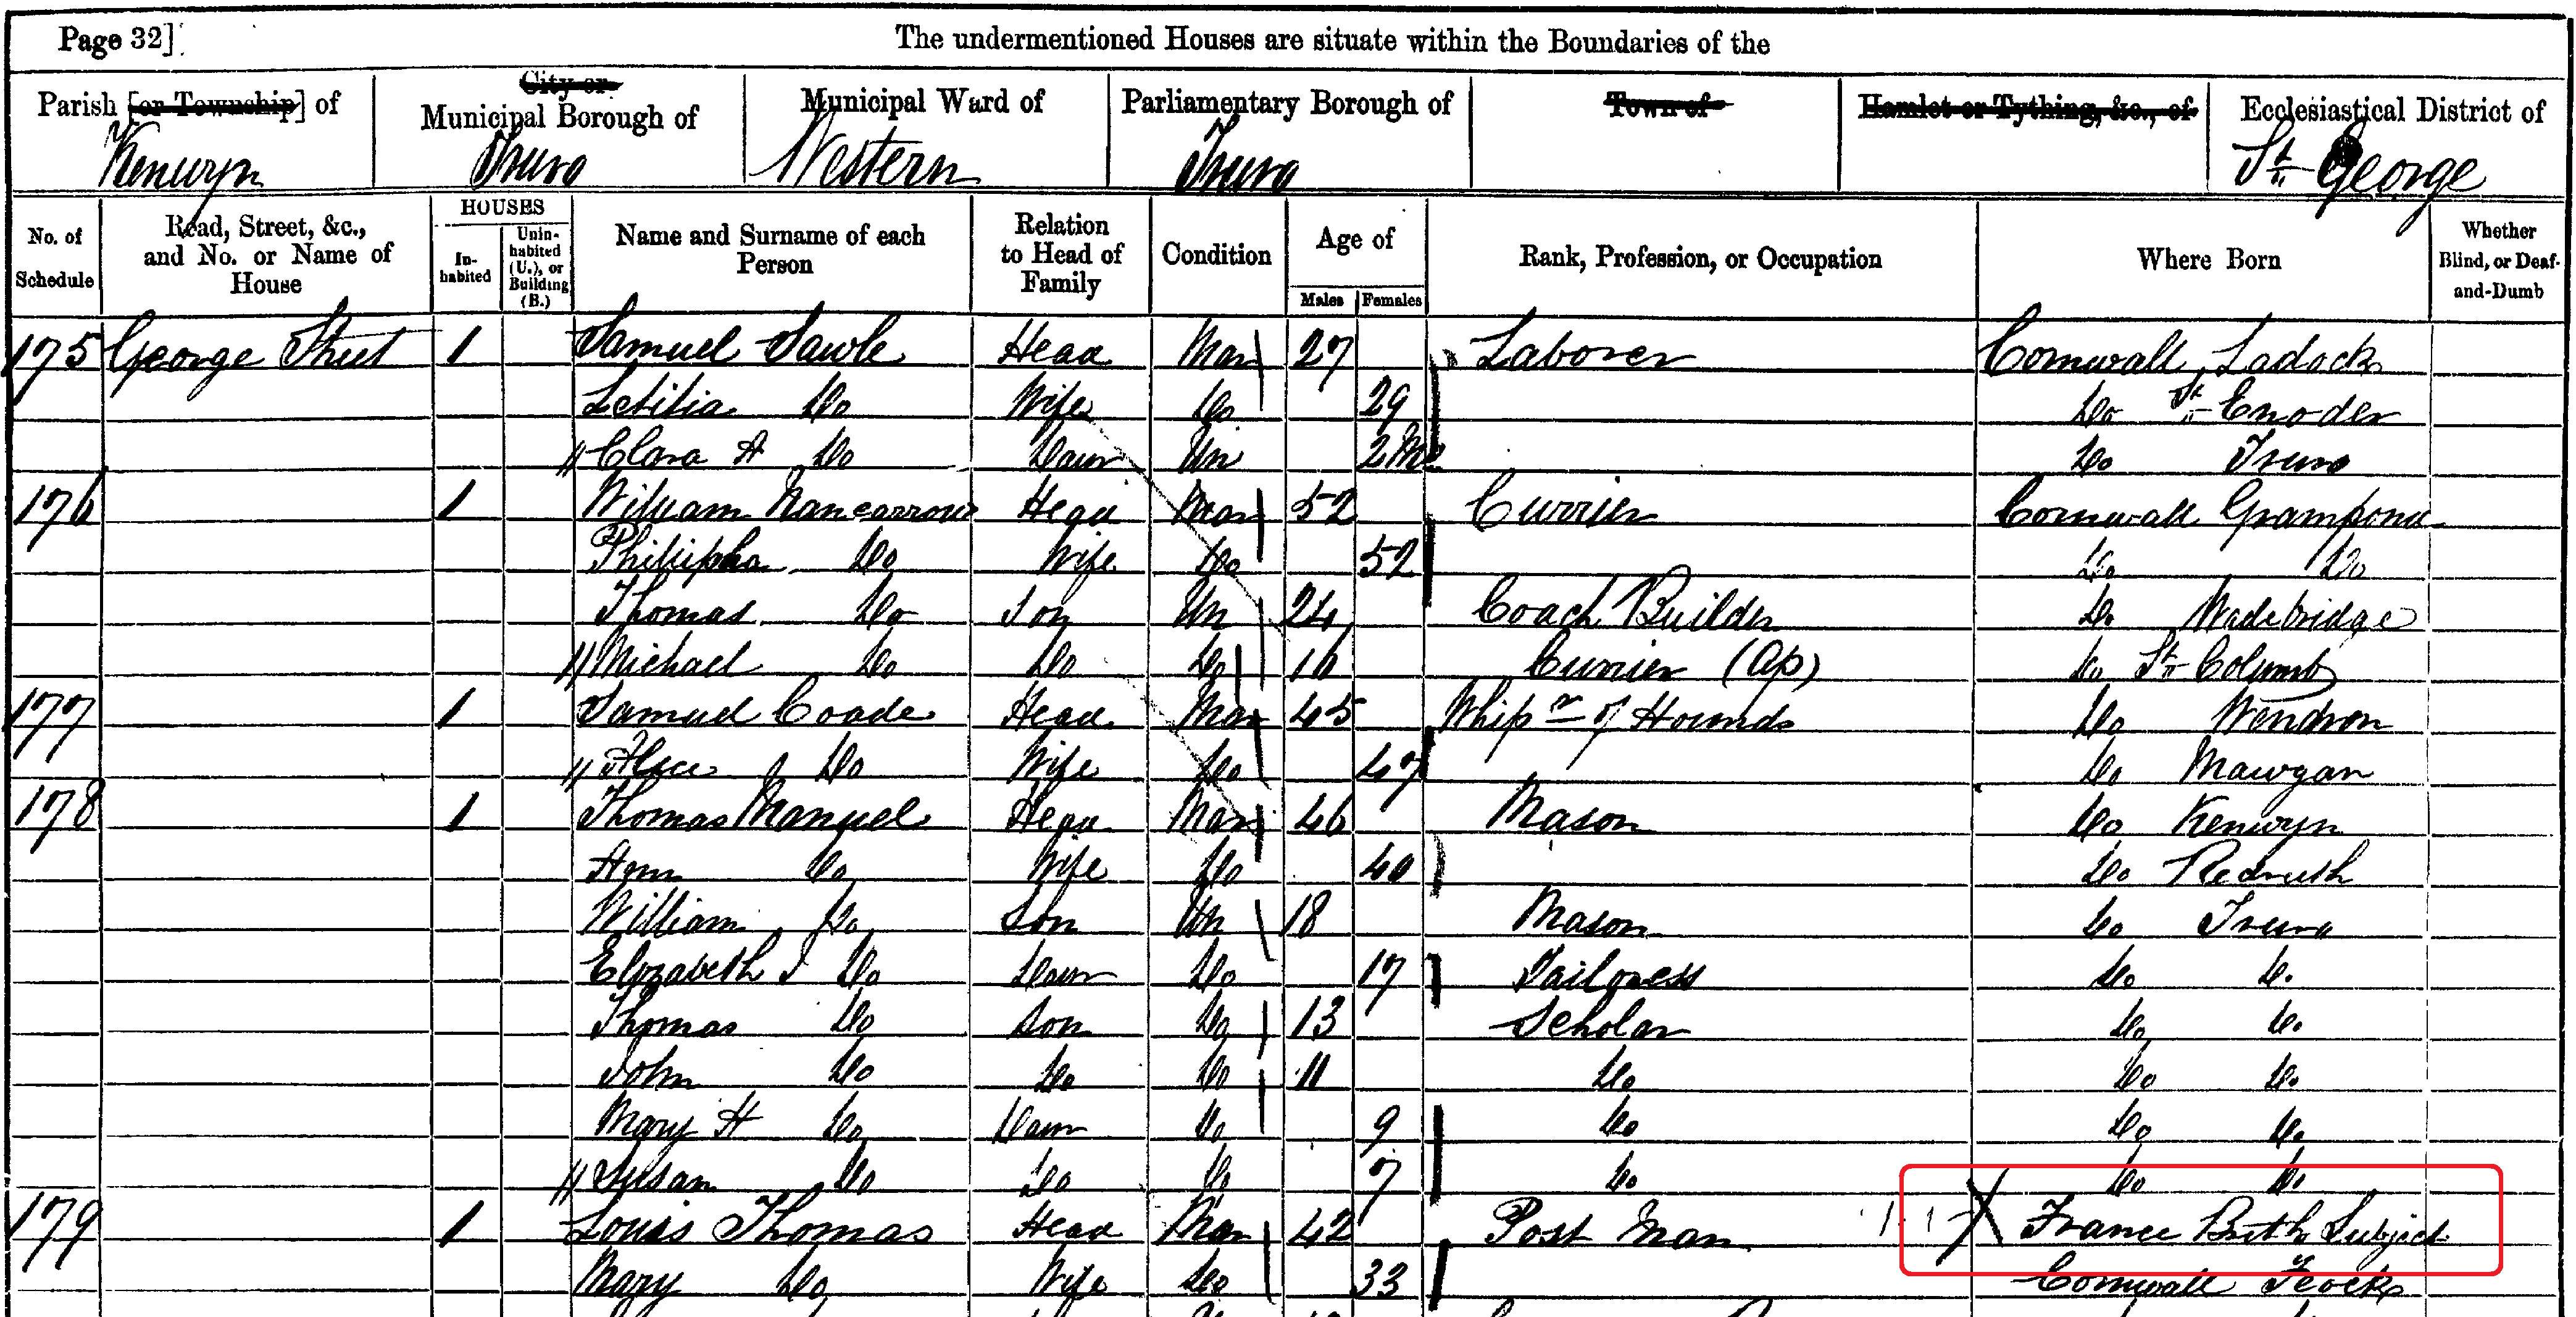 1861 census for Truro with place of birth for Louis Thomas as France